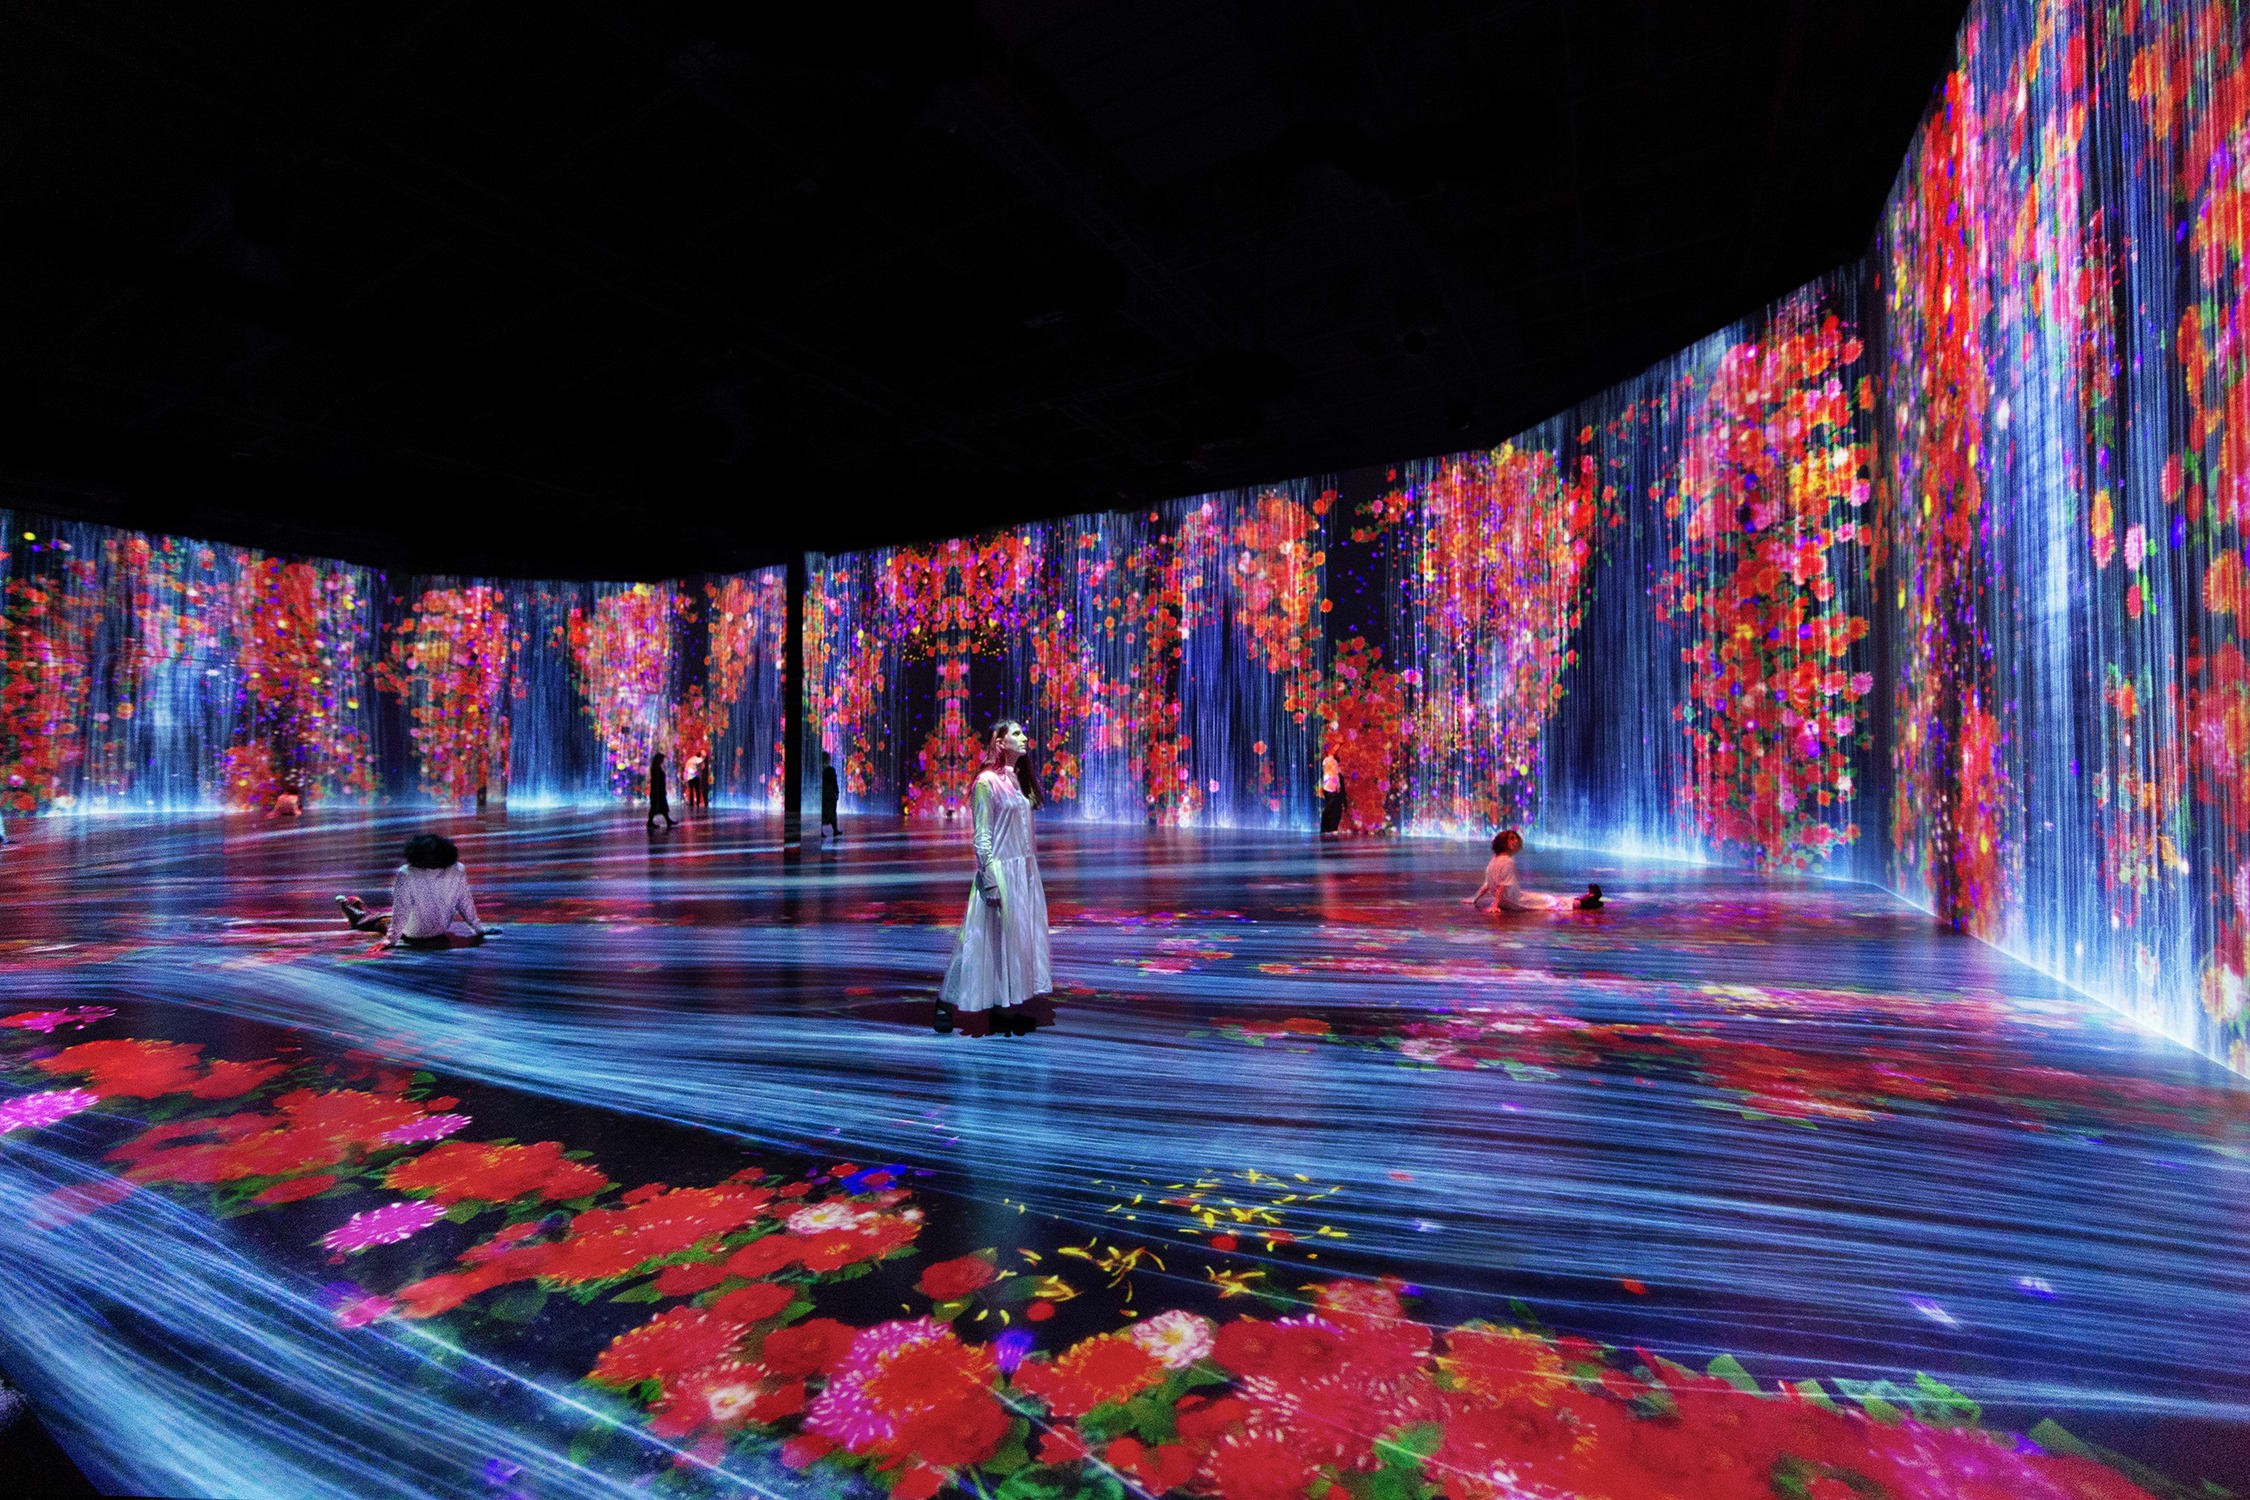 teamLab, Flowers and People, Cannot be Controlled but Live Together – Transcending Boundaries, A Whole Year per Hour, 2017.  Sound: Hideaki Takahashi. Installation view of 'Every Wall is a Door', Superblue Miami, 2021.  © teamLab. Courtesy of Pace Gallery, New York City, Geneva, Hong Kong, London, Palm Beach, Palo Alto, and Seoul.